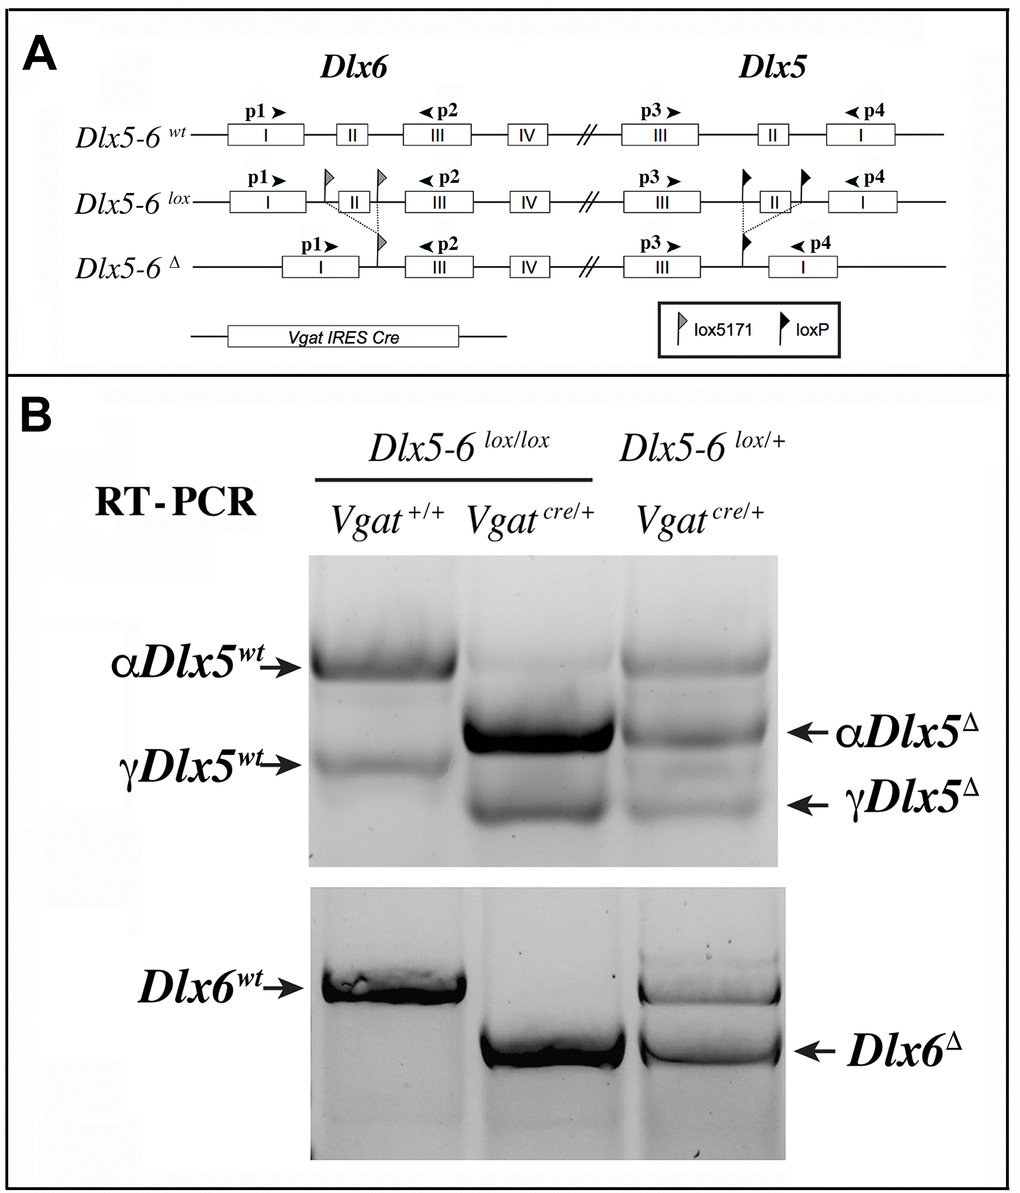 RT-PCR analysis of Dlx5 and Dlx6 expression in the cerebral cortex. (A) Primers p1 to p4 were used to analyze the presence of Dlx5 and Dlx6 transcripts in reverse-transcribed RNA extracts from adult cerebral cortex fragments. (B) Two known splice variants of Dlx5(αDlx5 and γDlx5, [58]) were amplified with primers p3 and p4. Deletion of exon II shifted both bands giving rise to αDlx5Δ and γDlx5Δ. A small fraction of Dlx5 transcripts, possibly corresponding to expression of this gene in non-GABAergic cells or a few non-cre expressing Vgat-positive cells, was not recombined. Dlx6 transcripts were amplified with primers p1 and p2 and did not show any splice variants.